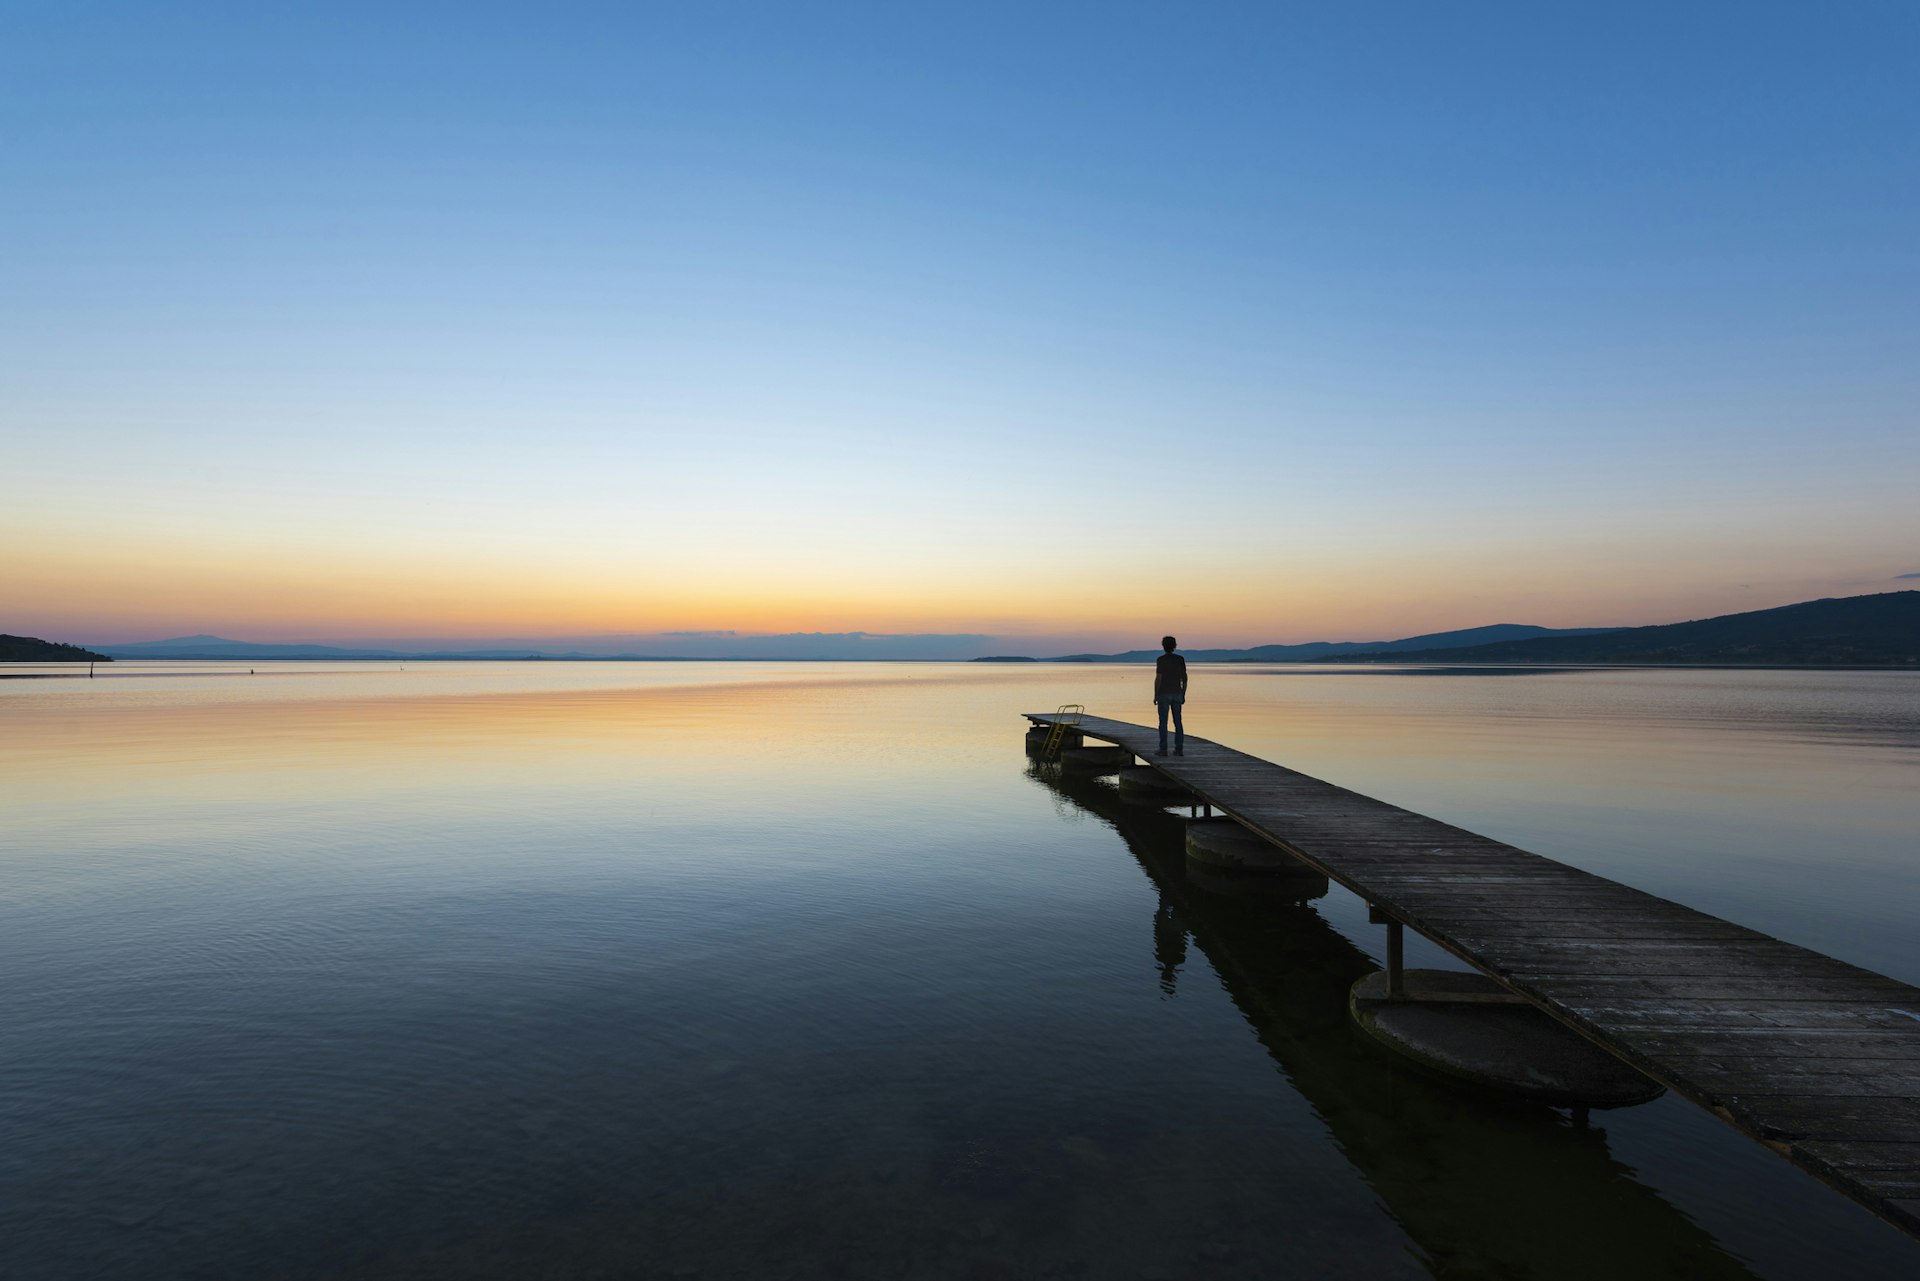 A man stands at the edge of Lake Trasimeno in Italy at sunset